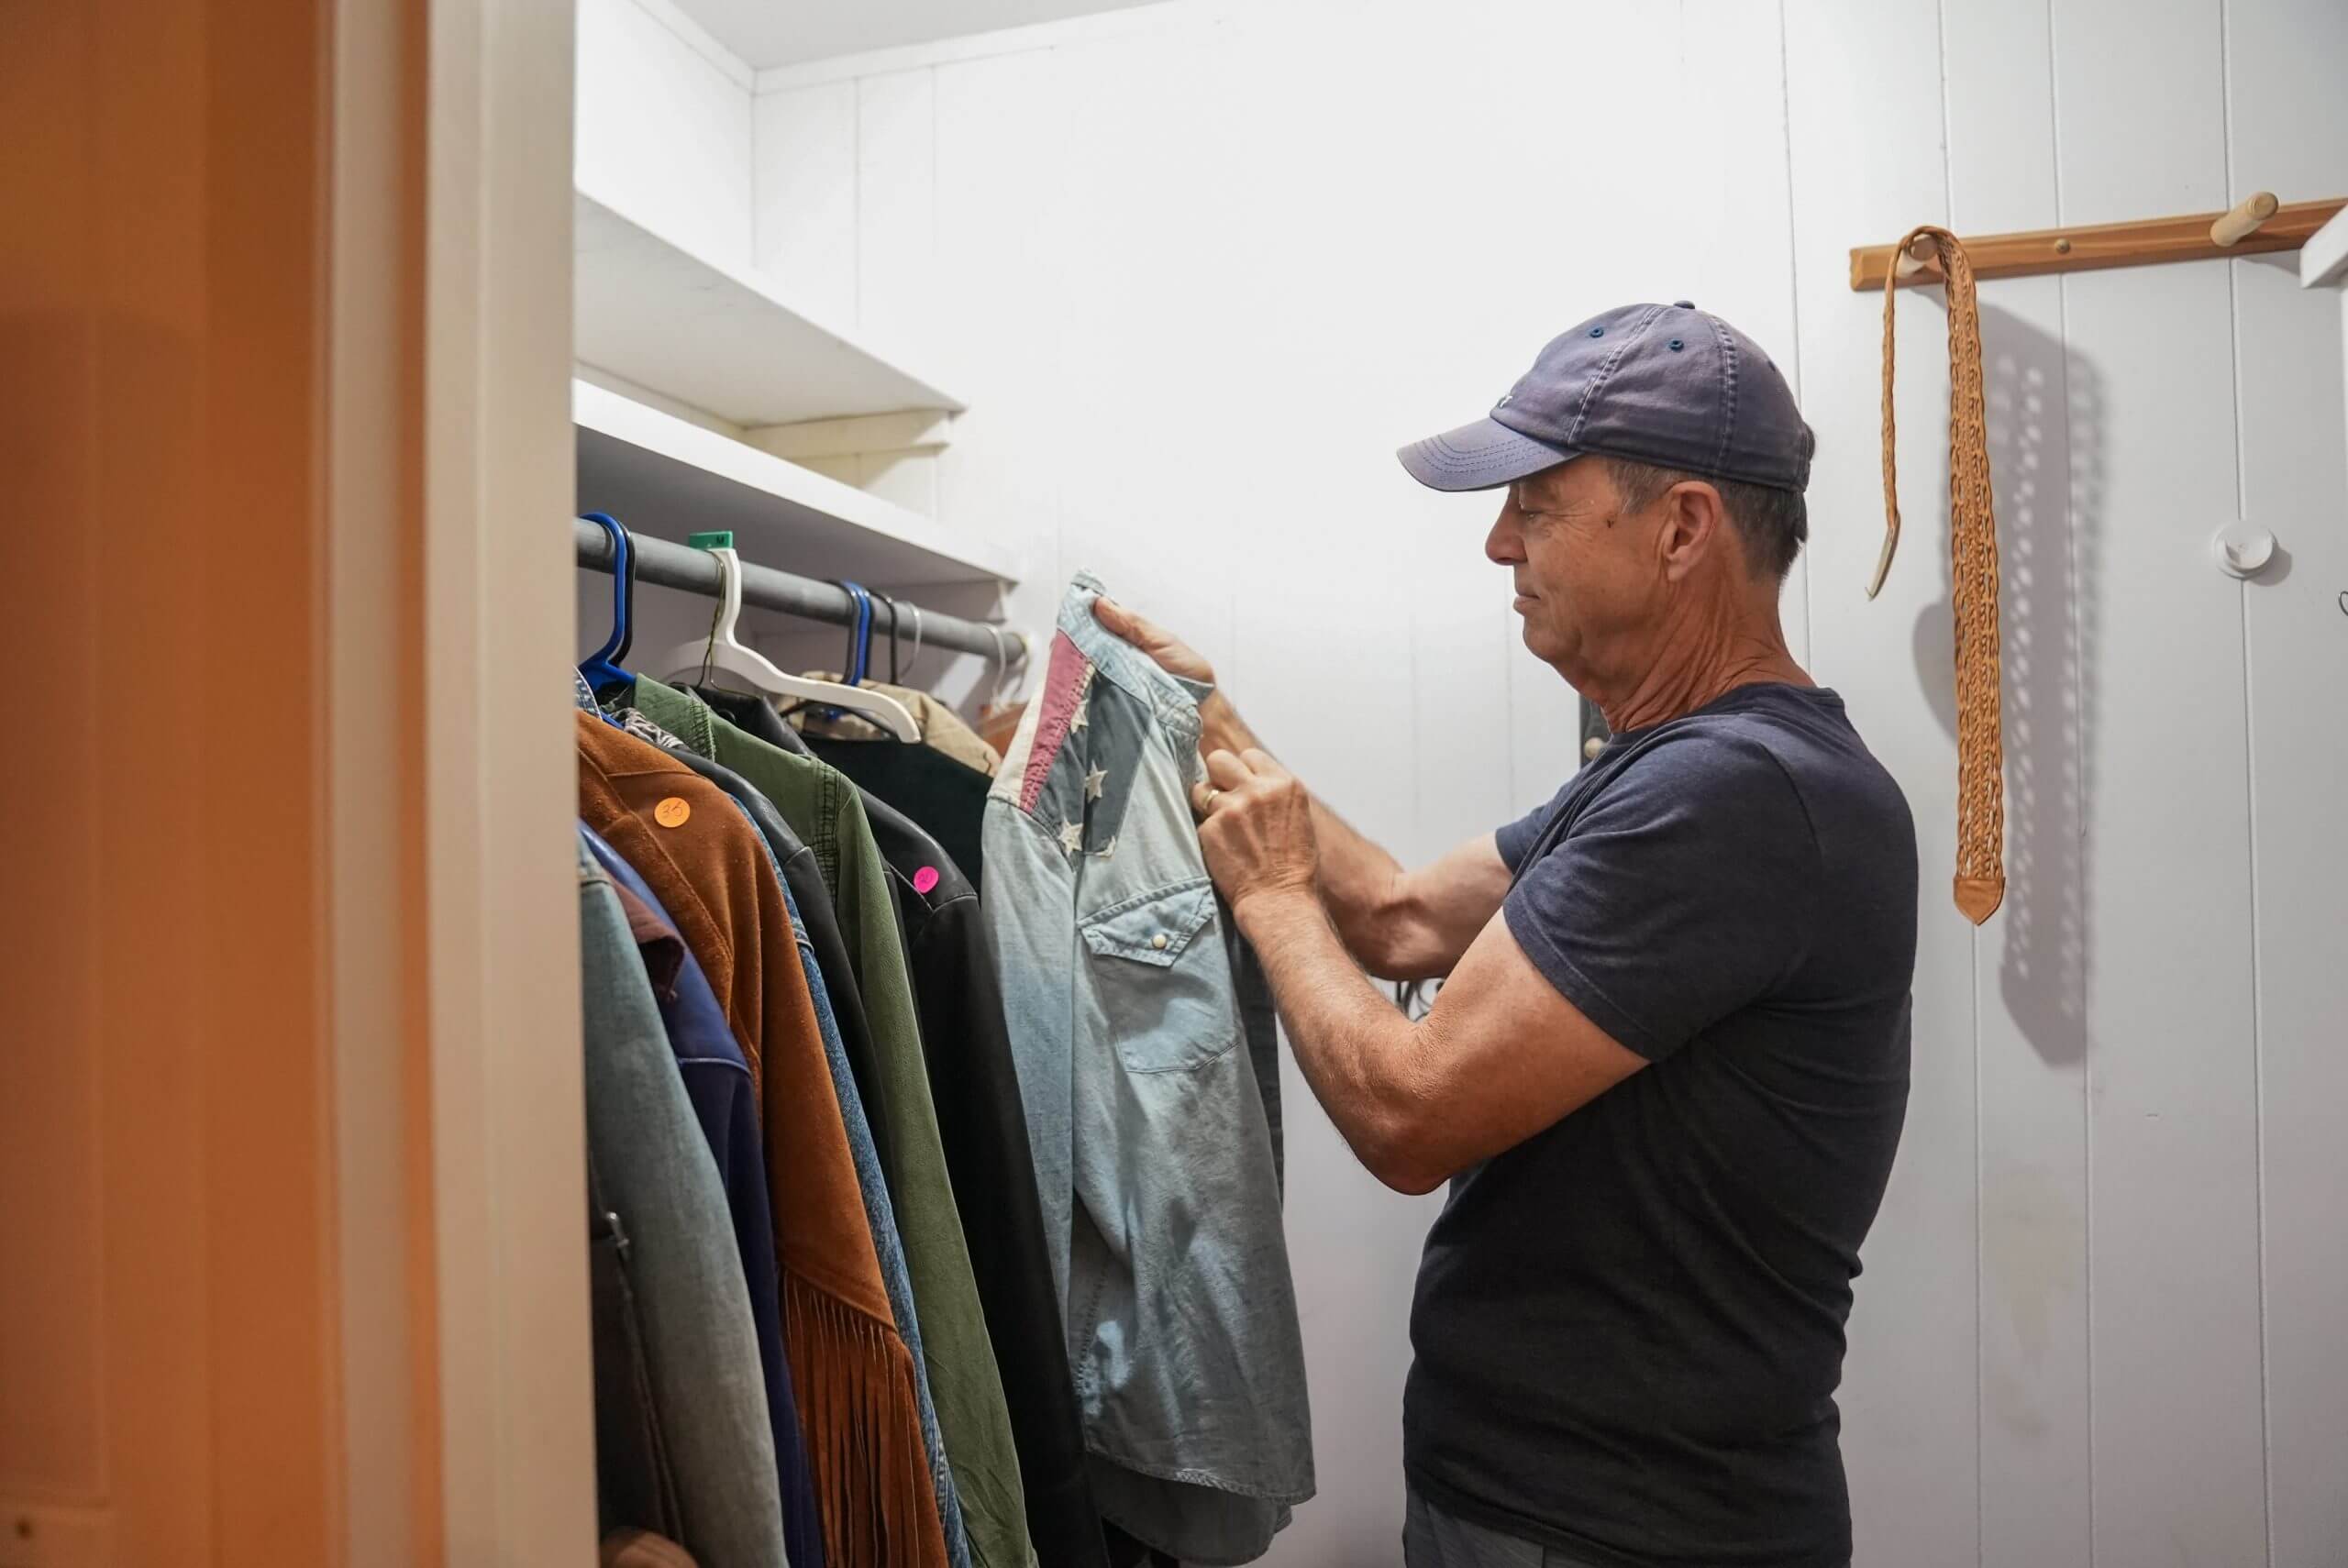 man searching for clothes in closet